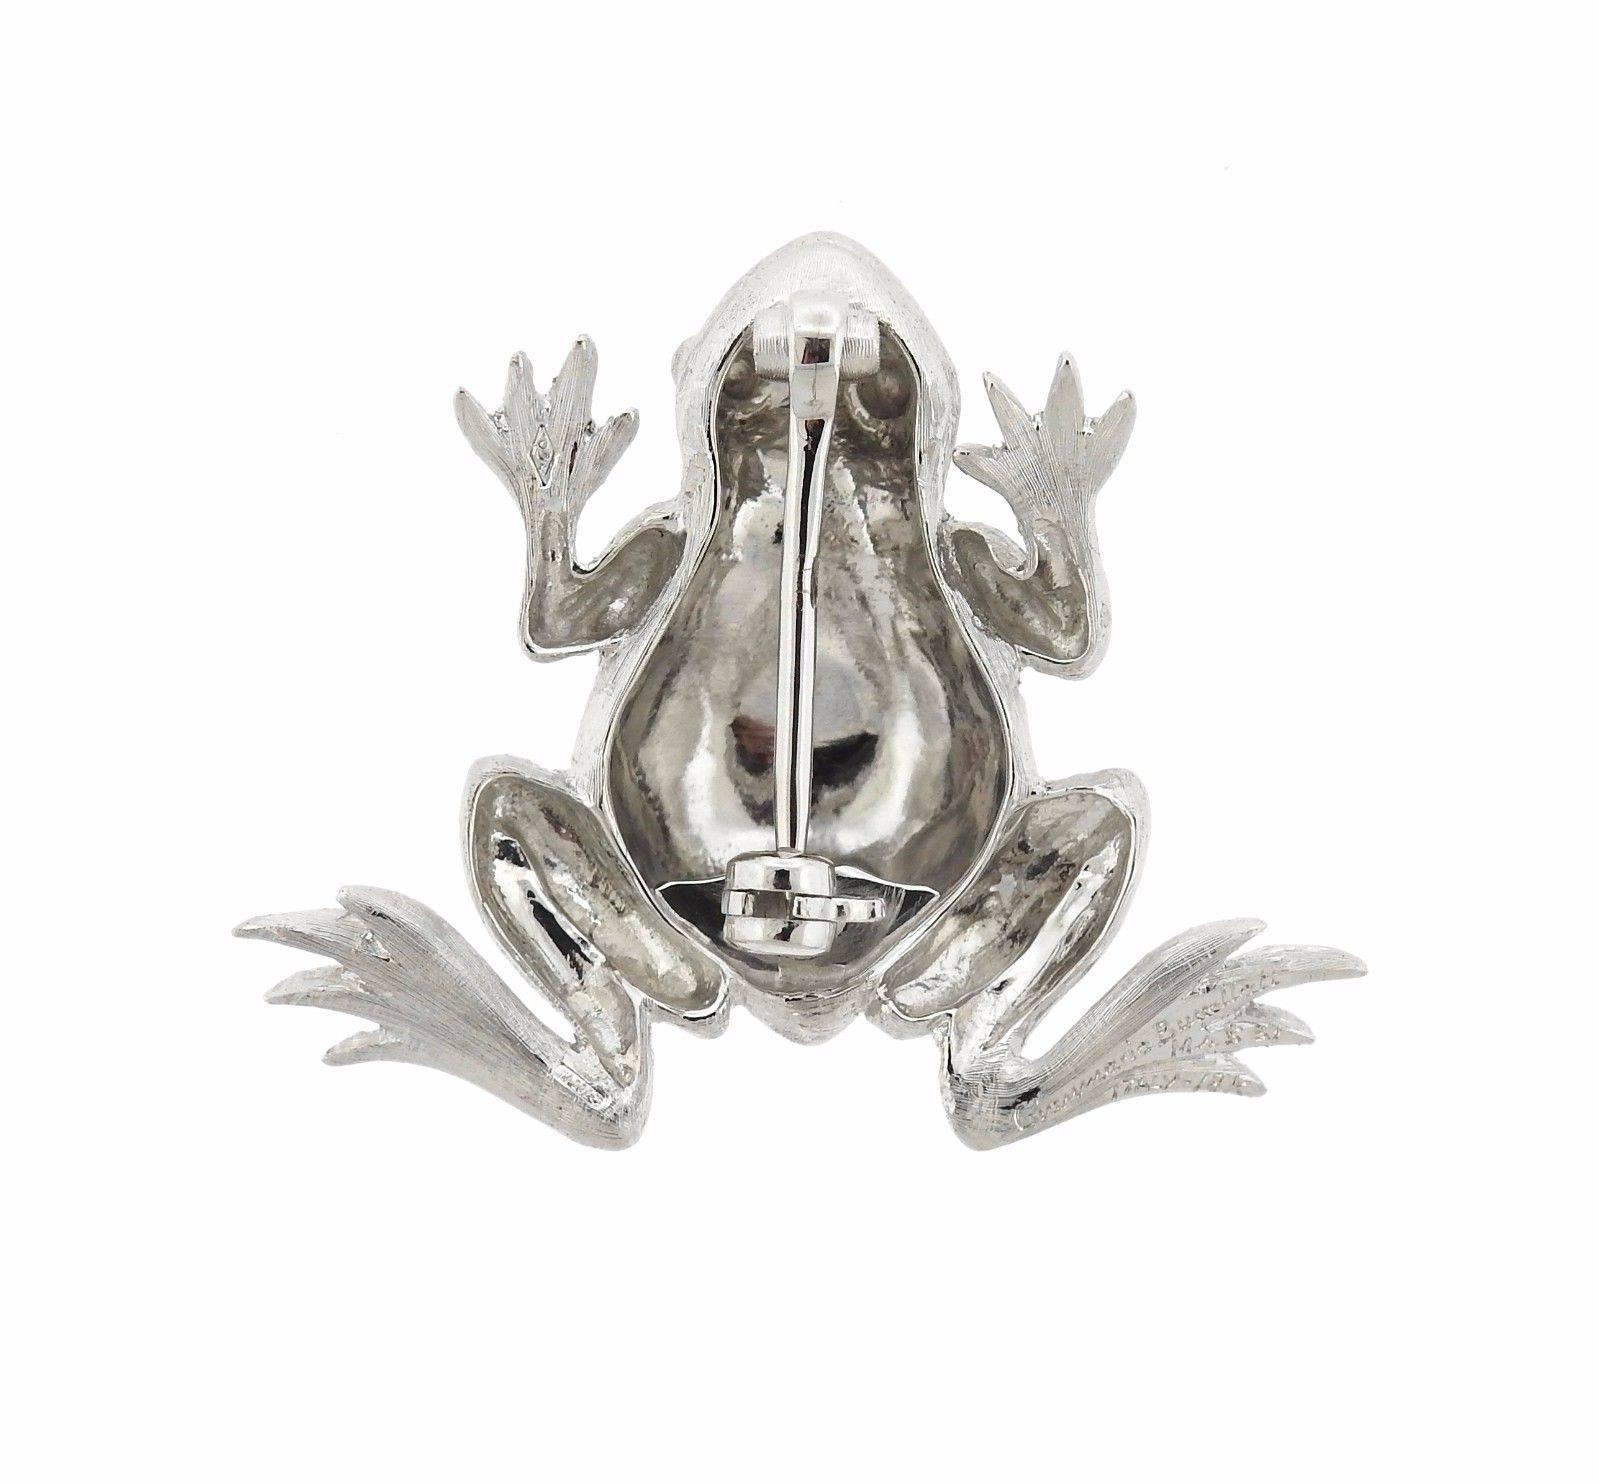 An 18k gold frog brooch by Gianmaria Buccellati.  The brooch measures 27mm x 33mm and weighs 8.6 grams.  Marked: Gianmaria Buccellati 18K Italy.  Comes with Buccellati paperwork.  Retail is $5330.